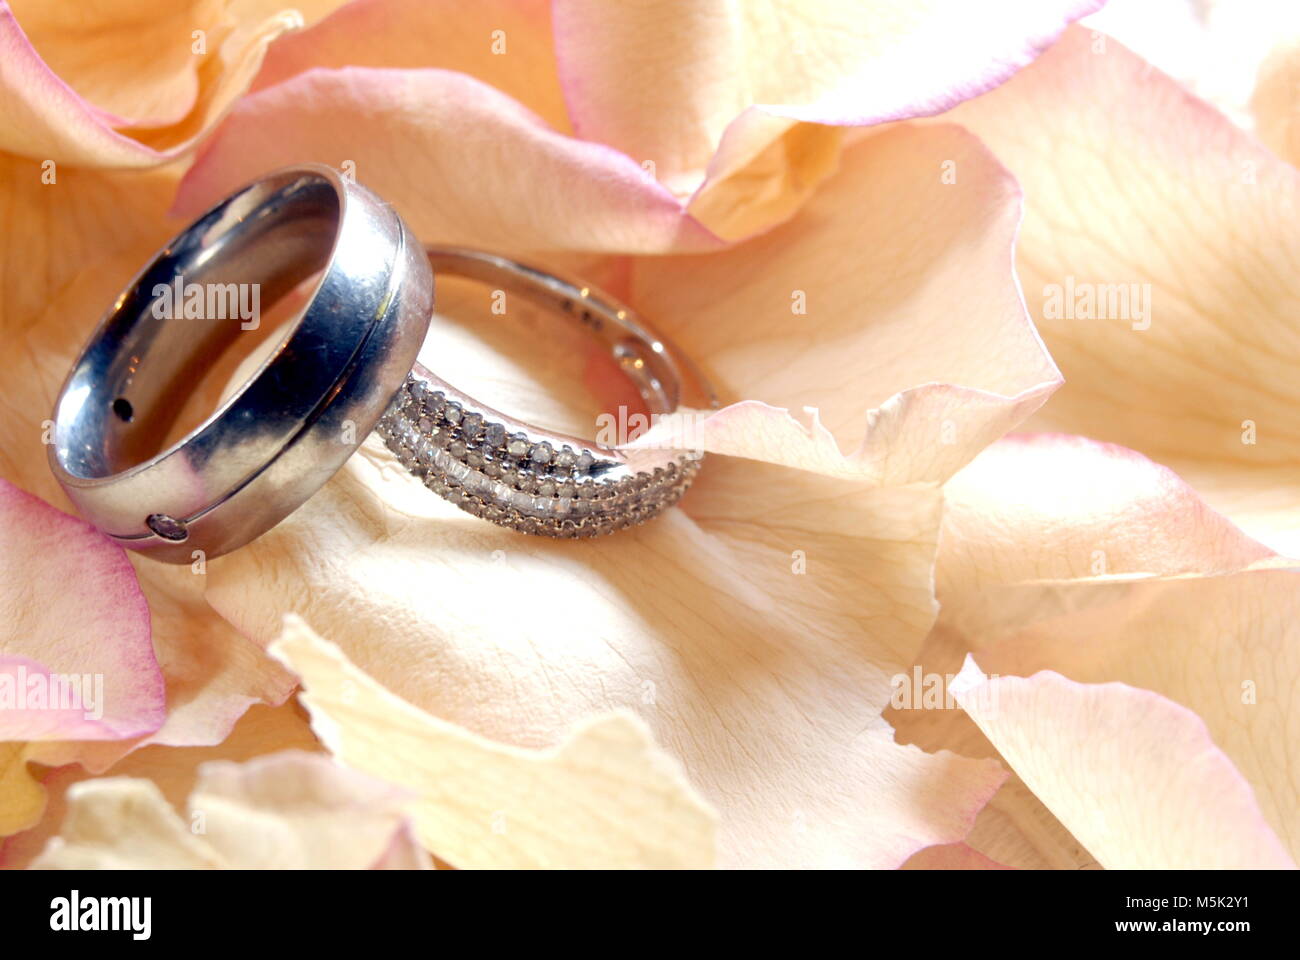 His and hers wedding rings on a bed of rose petals. Stock Photo